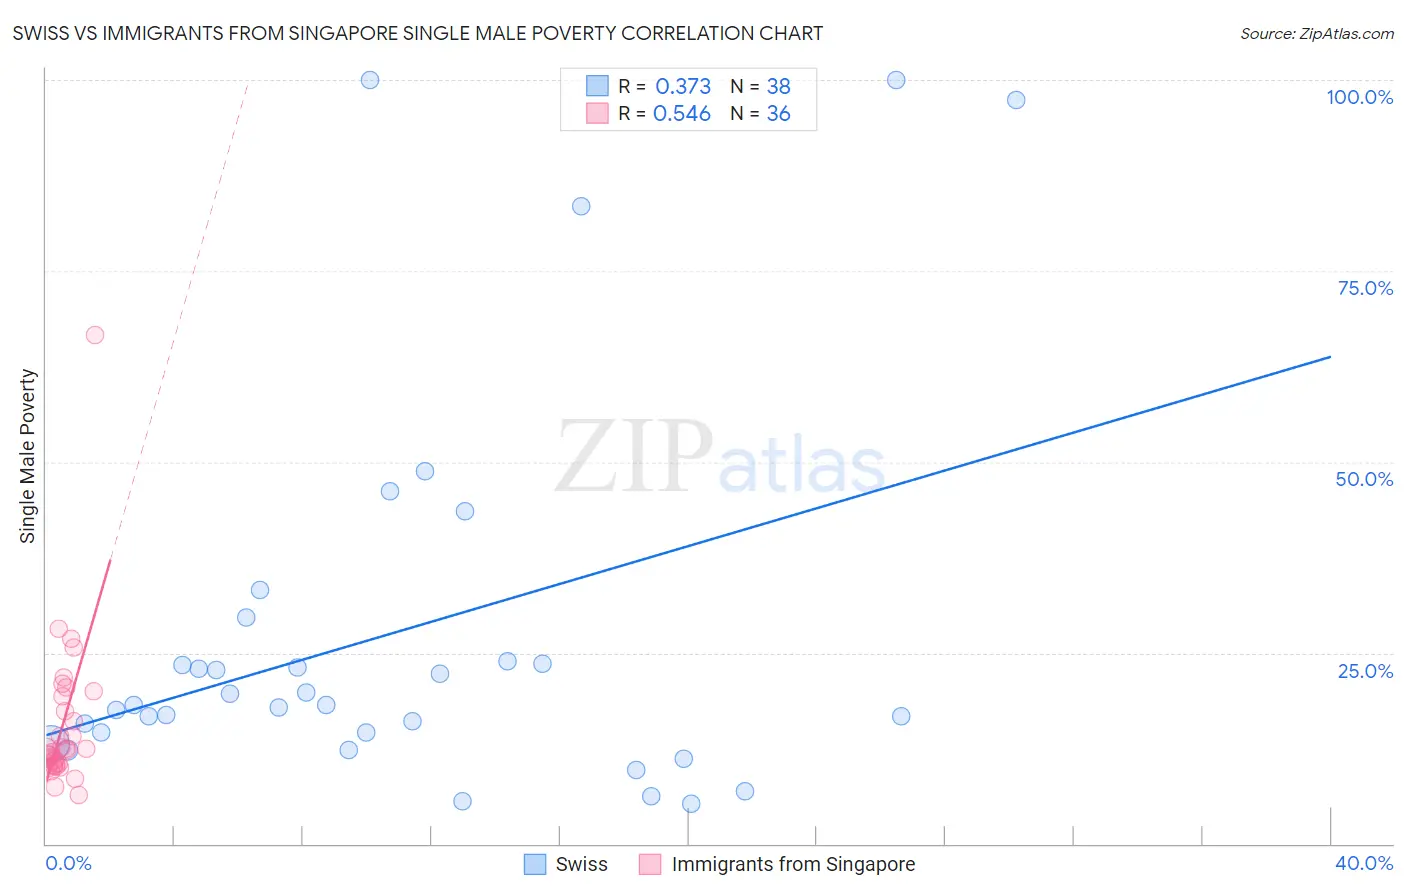 Swiss vs Immigrants from Singapore Single Male Poverty